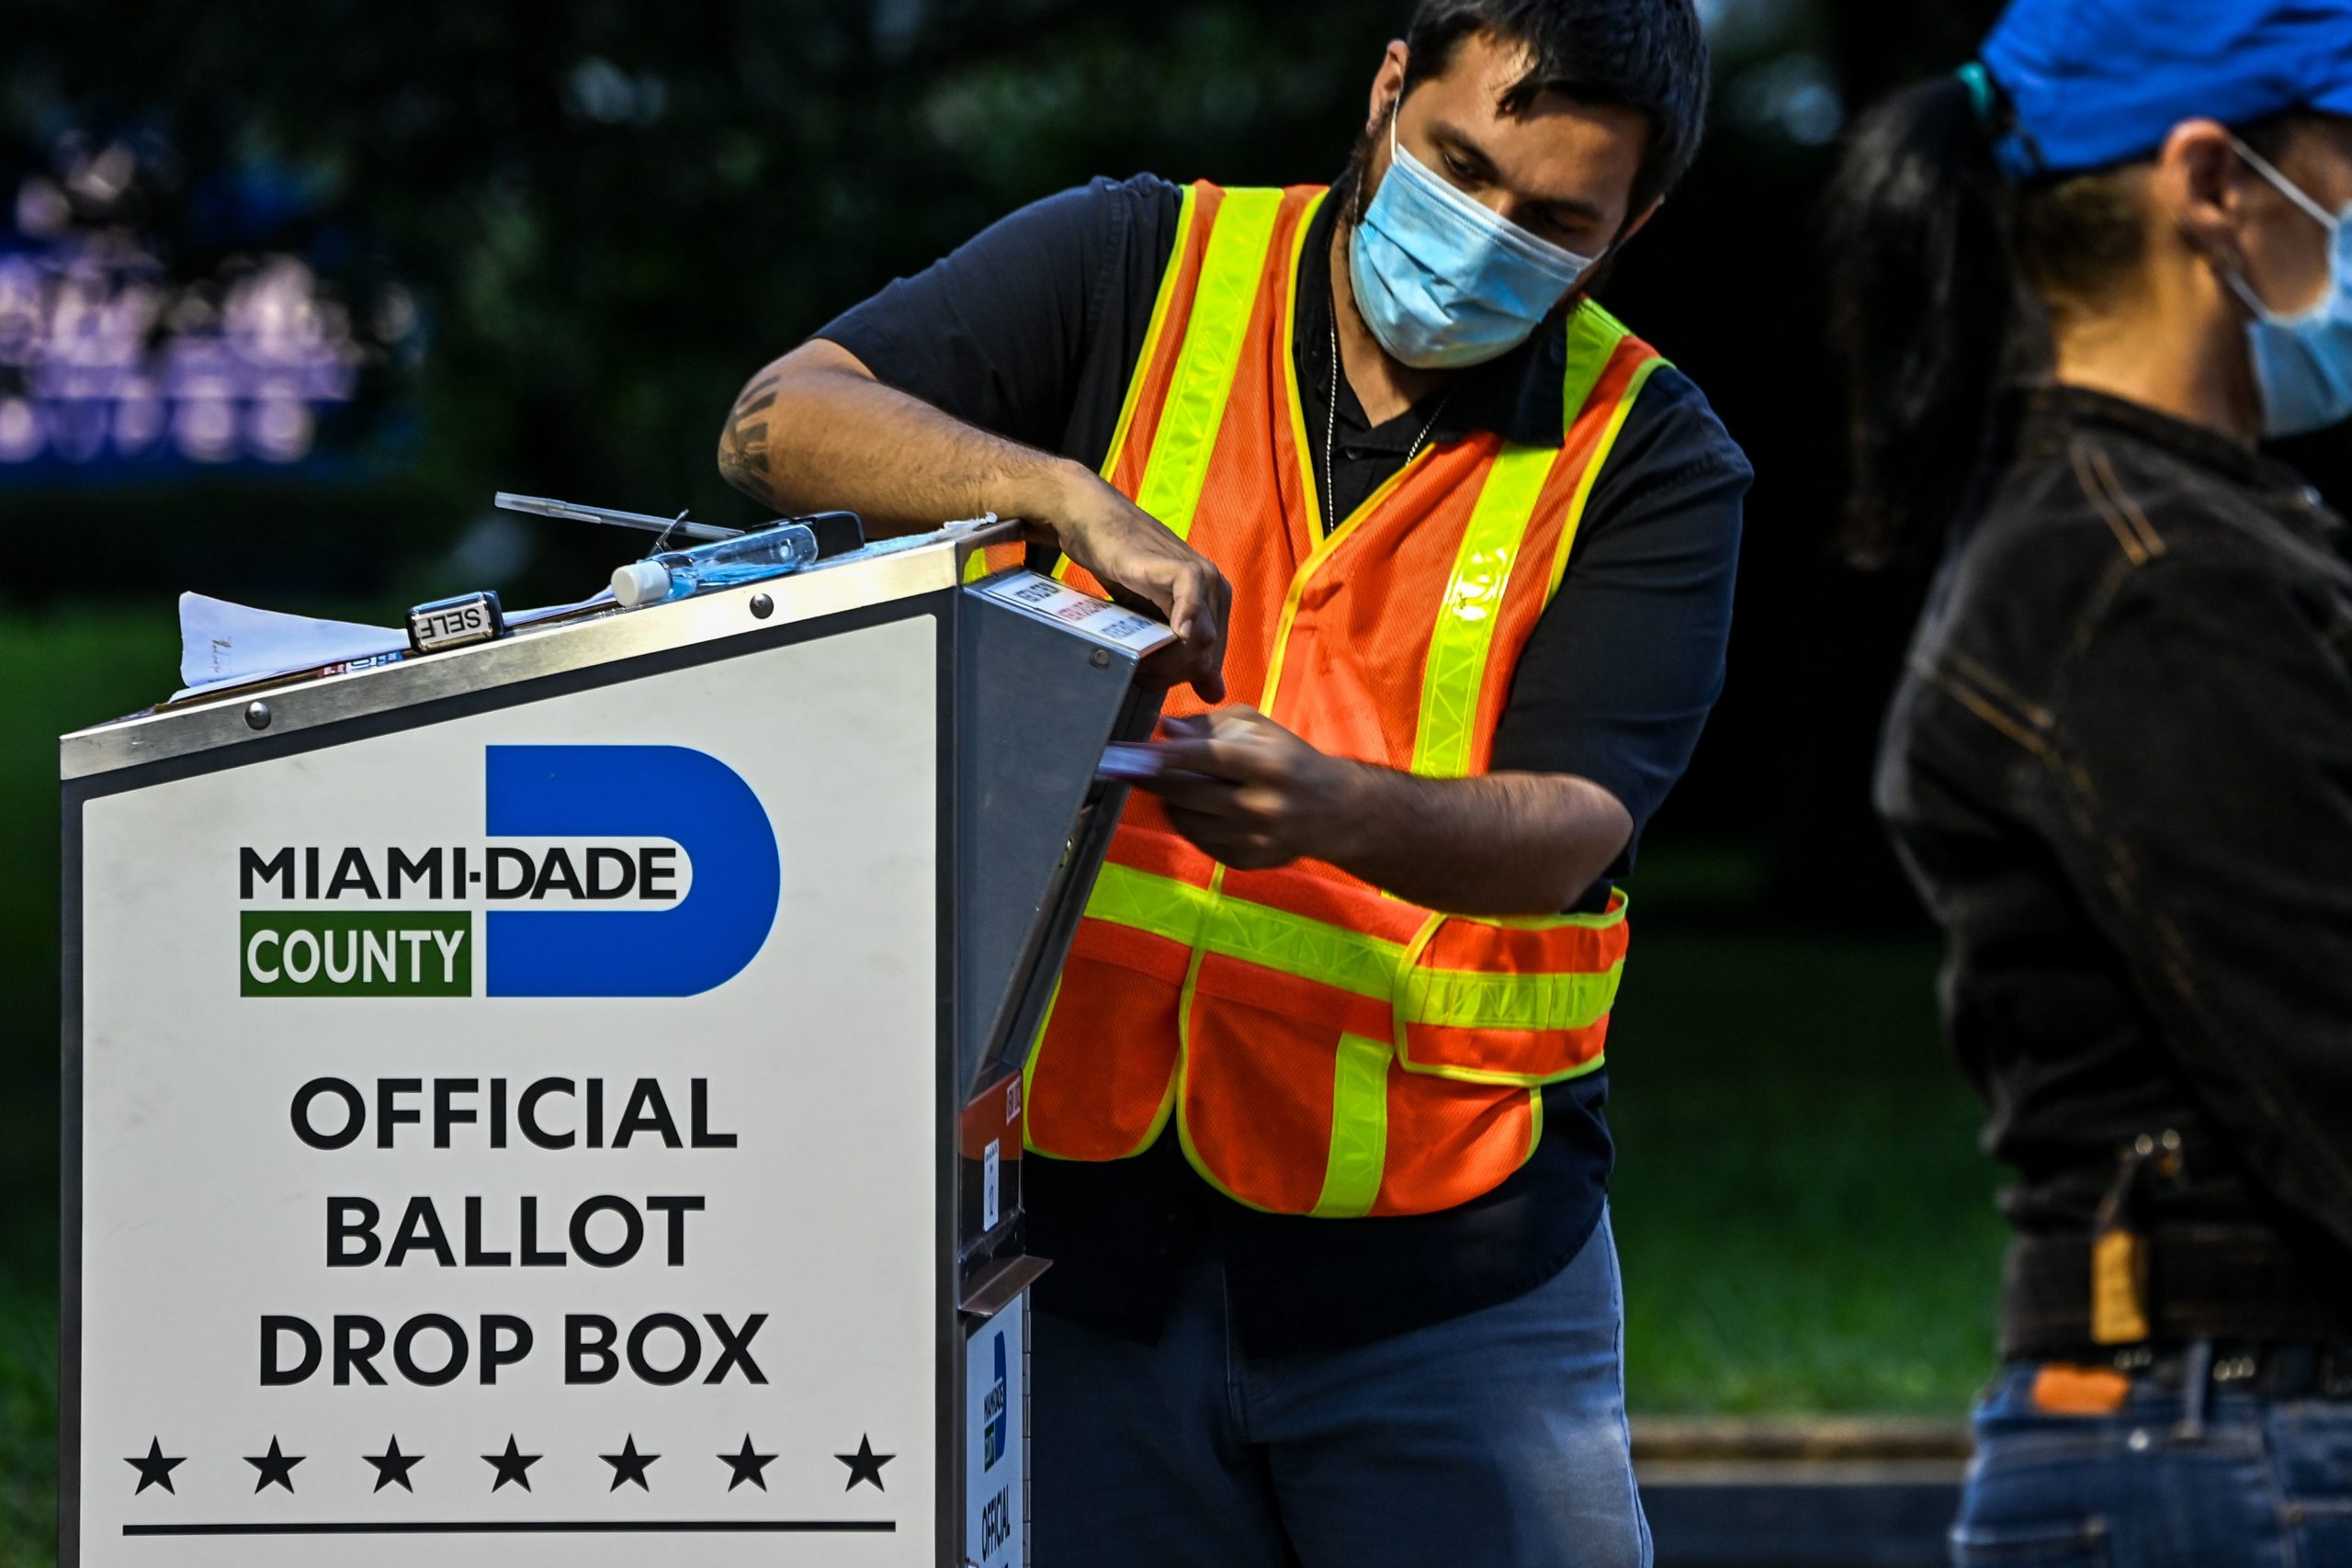 A poll worker helps a voter put as she drops off her mail-in ballot at an official Miami-Dade County drive-thru ballot drop box at the Miami-Dade County Election Department in Miami, Florida on November 3, 2020. - The US started voting Tuesday in an election amounting to a referendum on Donald Trump's uniquely brash and bruising presidency, which Democratic opponent and frontrunner Joe Biden urged Americans to end to restore "our democracy." (Photo by CHANDAN KHANNA / AFP) (Photo by CHANDAN KHANNA/AFP via Getty Images)